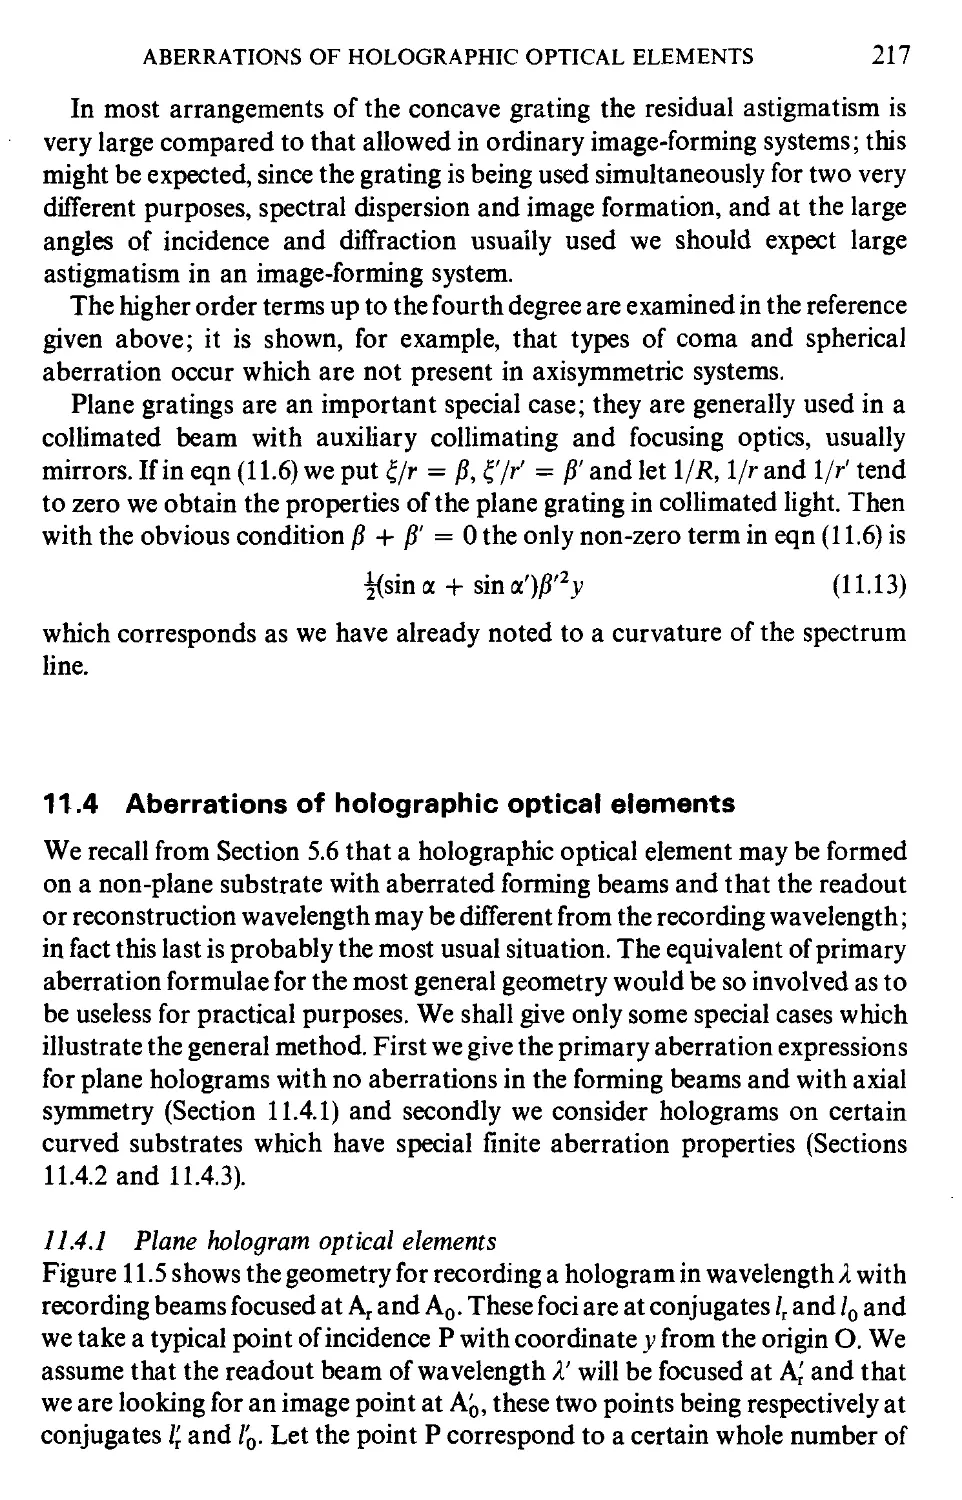 11.4 Aberrations of holographic optical elements